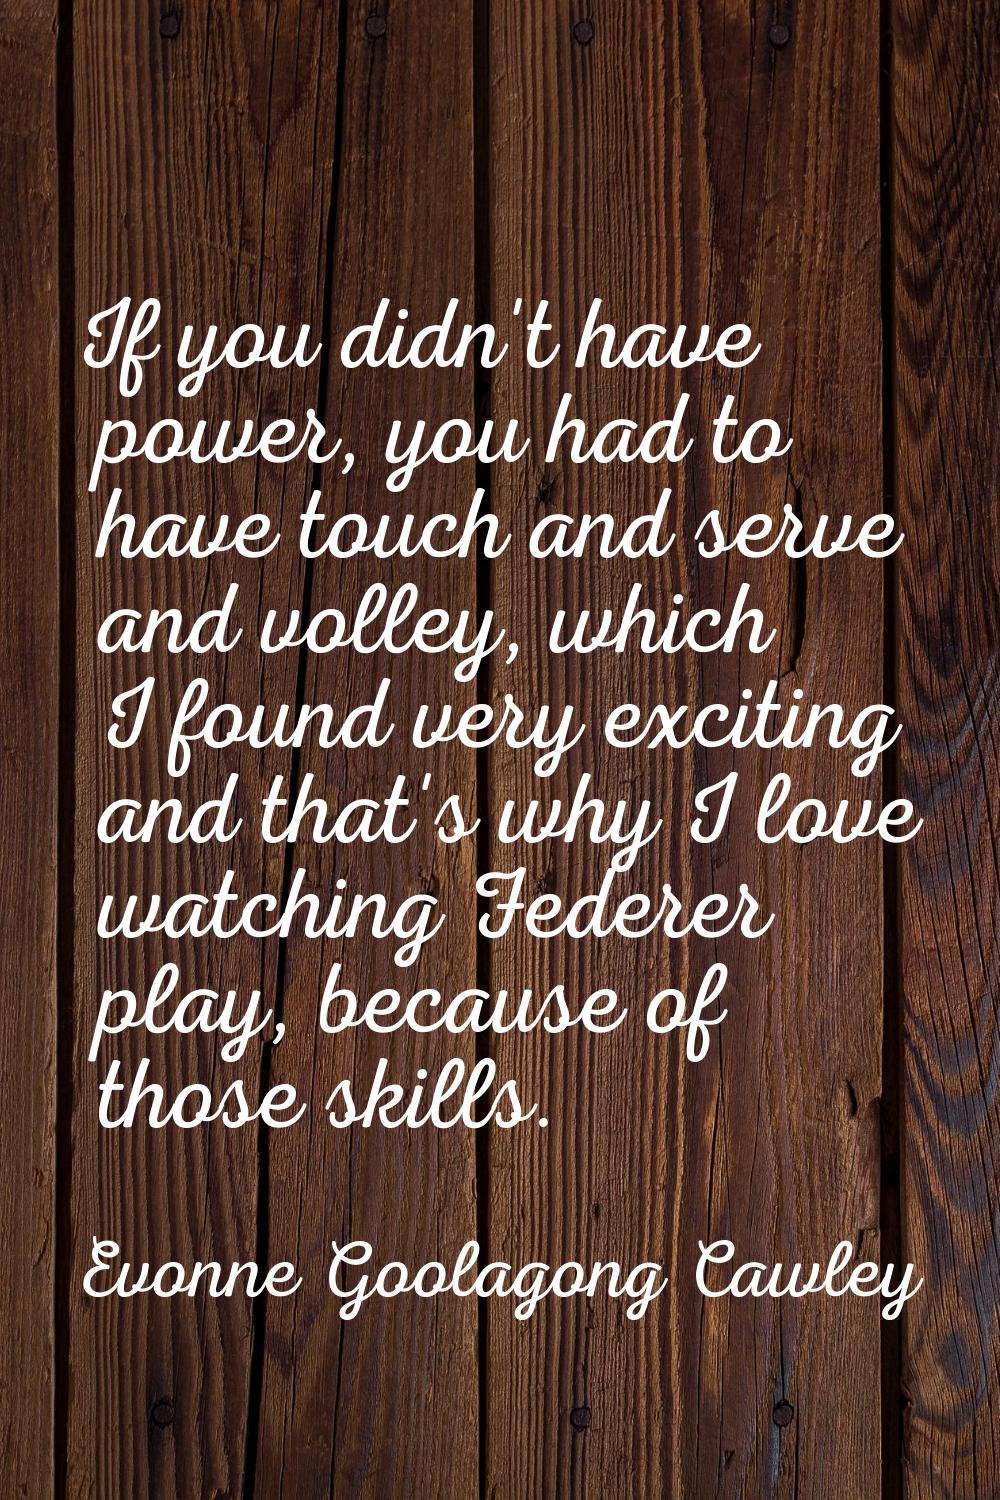 If you didn't have power, you had to have touch and serve and volley, which I found very exciting a